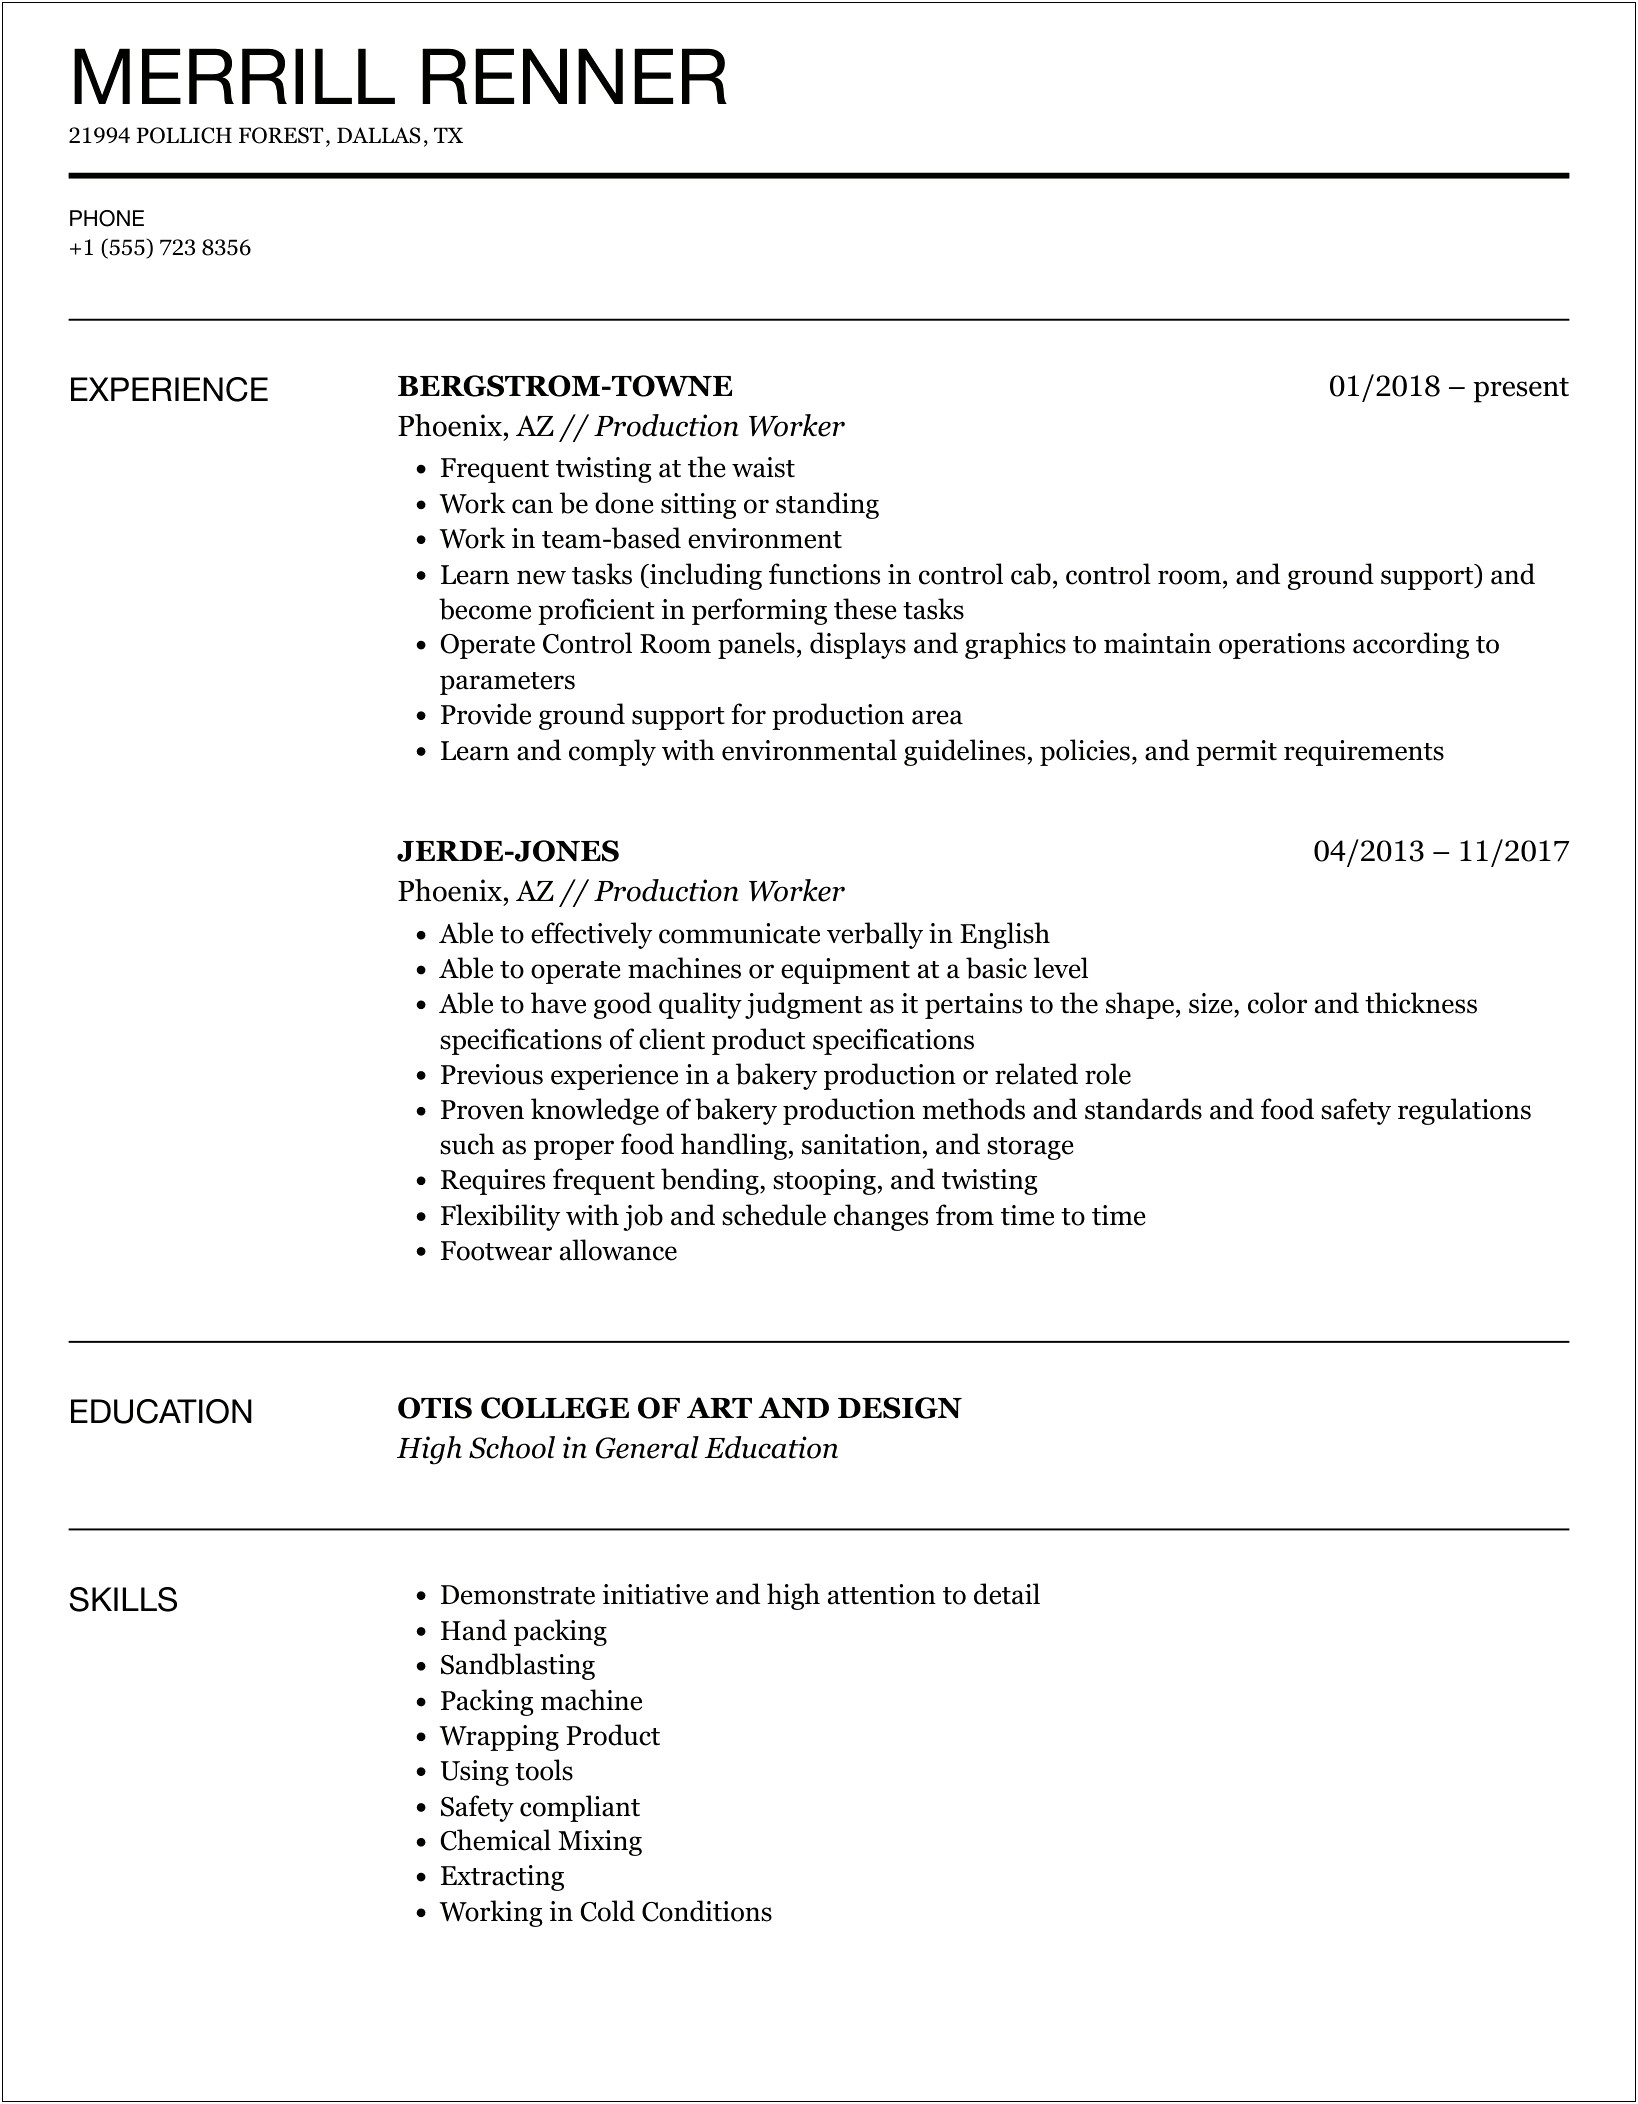 Resume Template After 3 Year Layoff